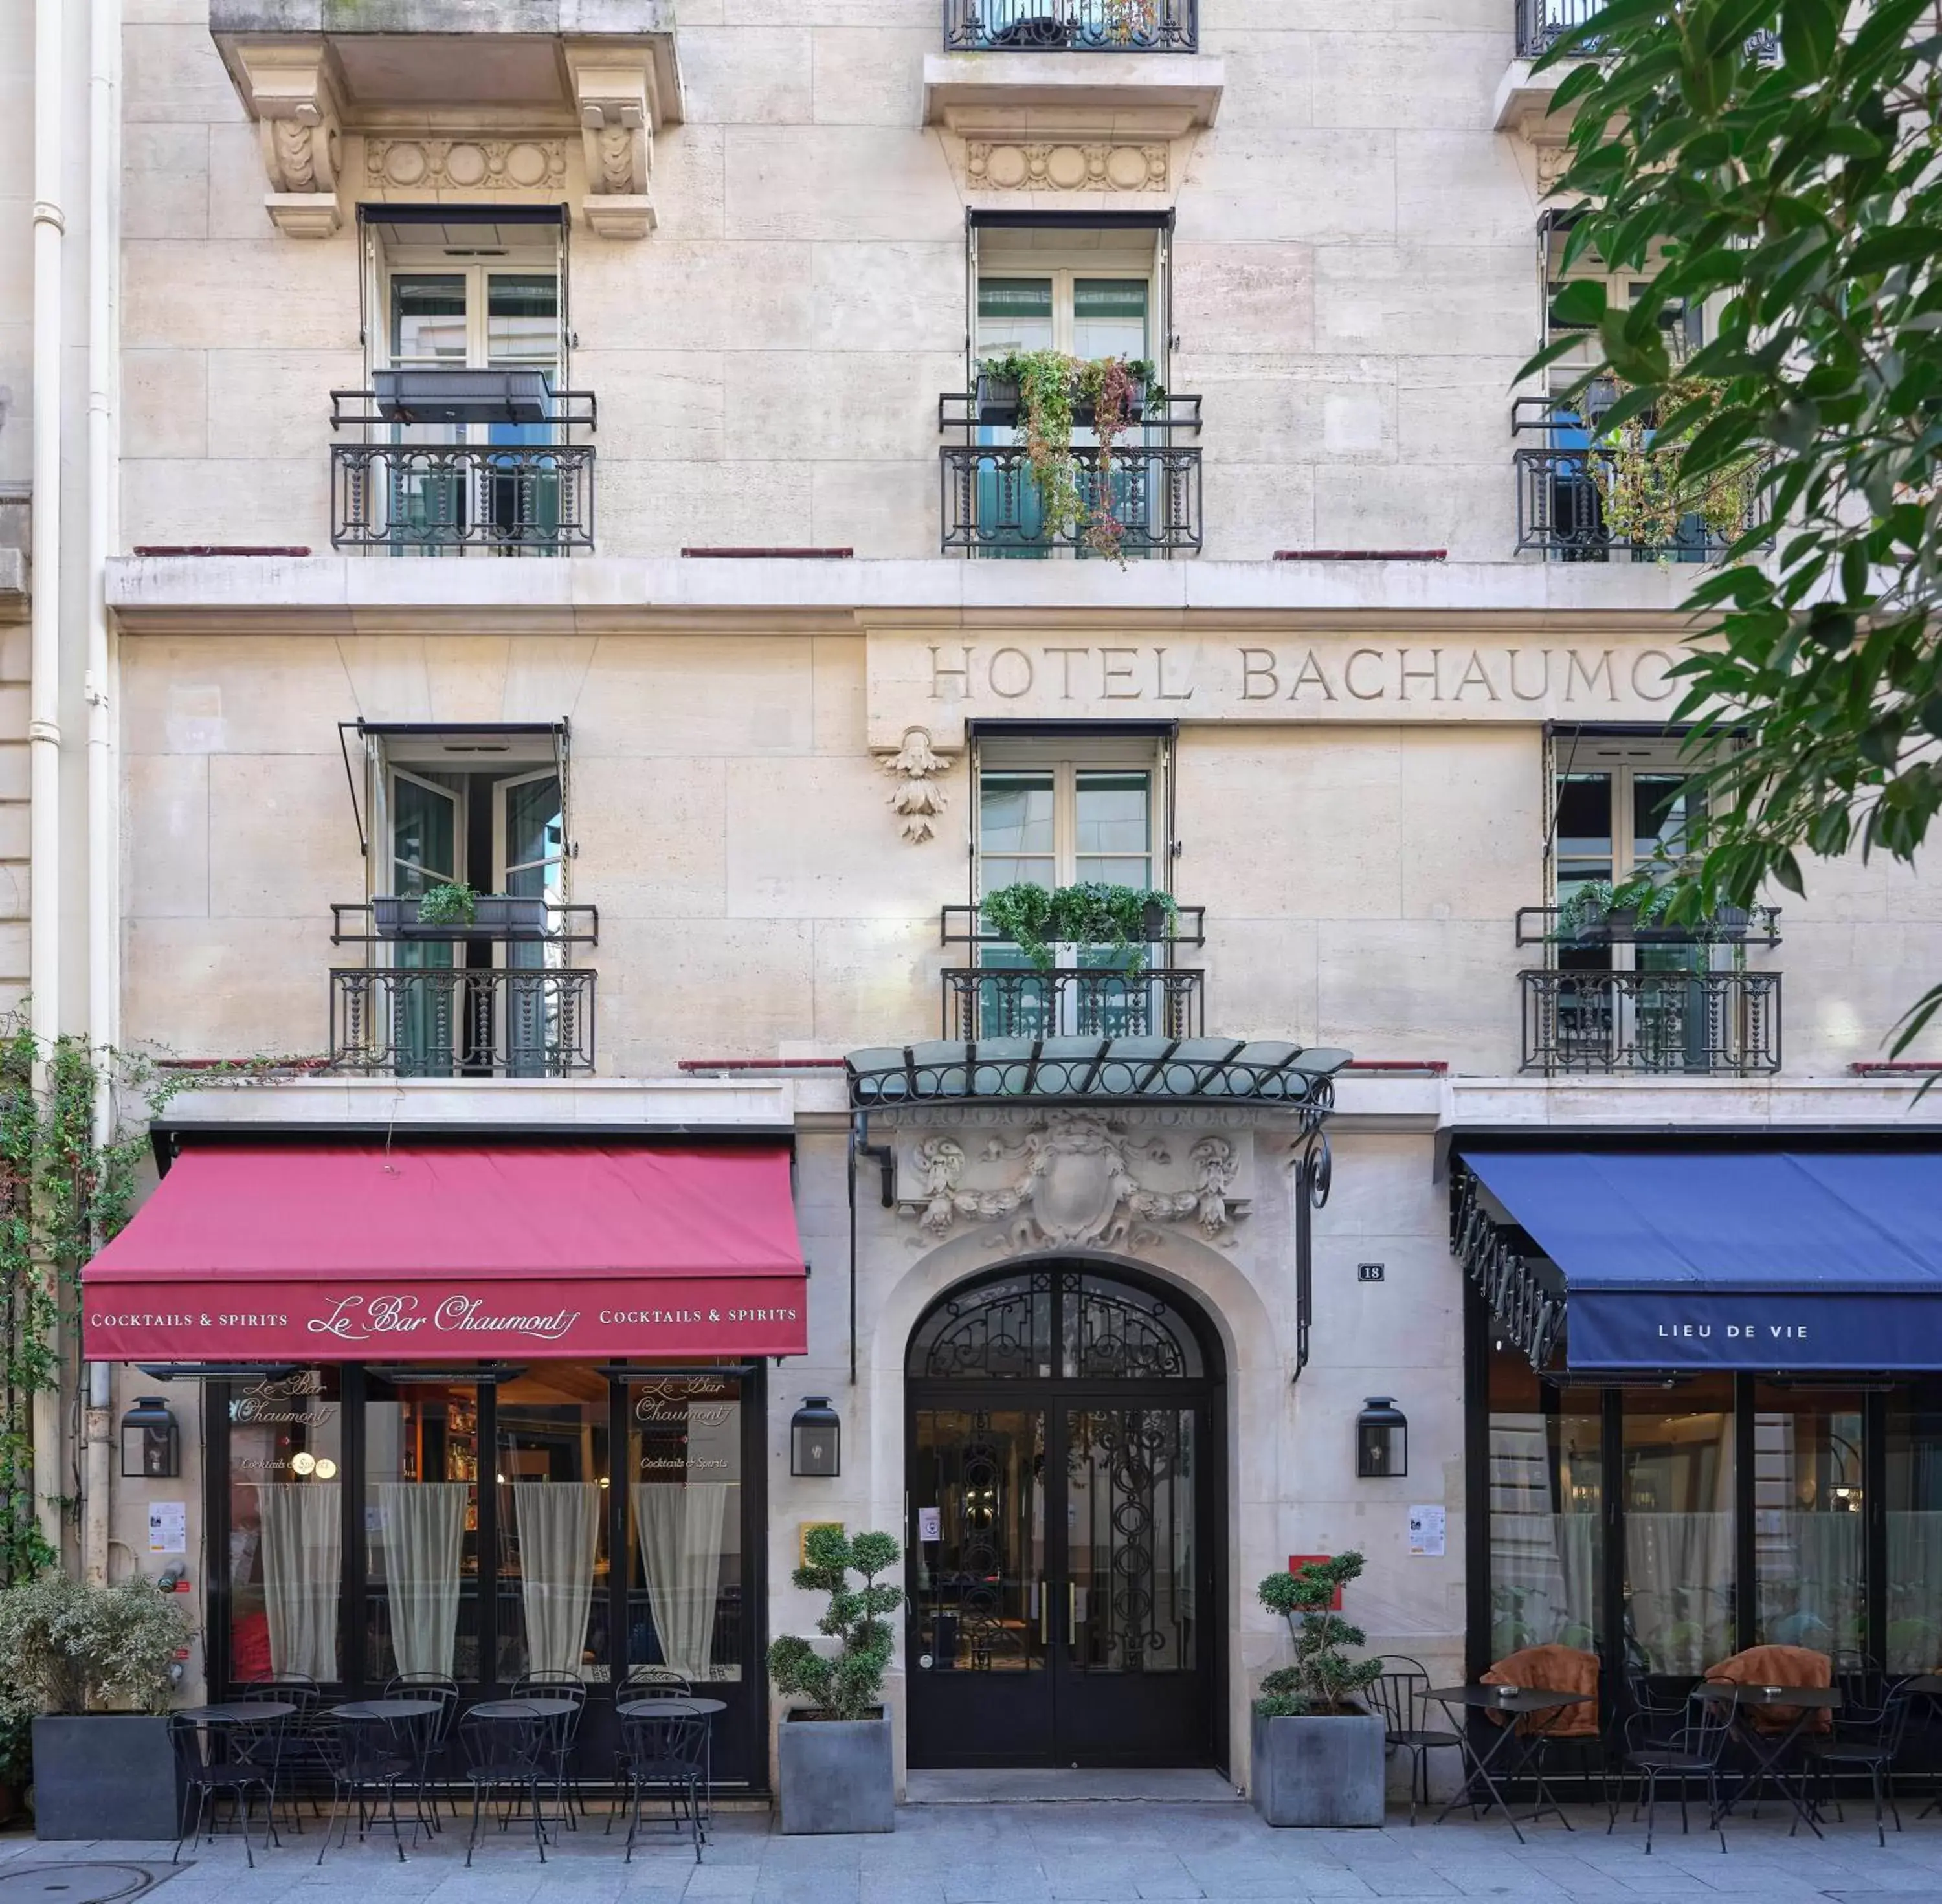 Property Building in Hotel Bachaumont